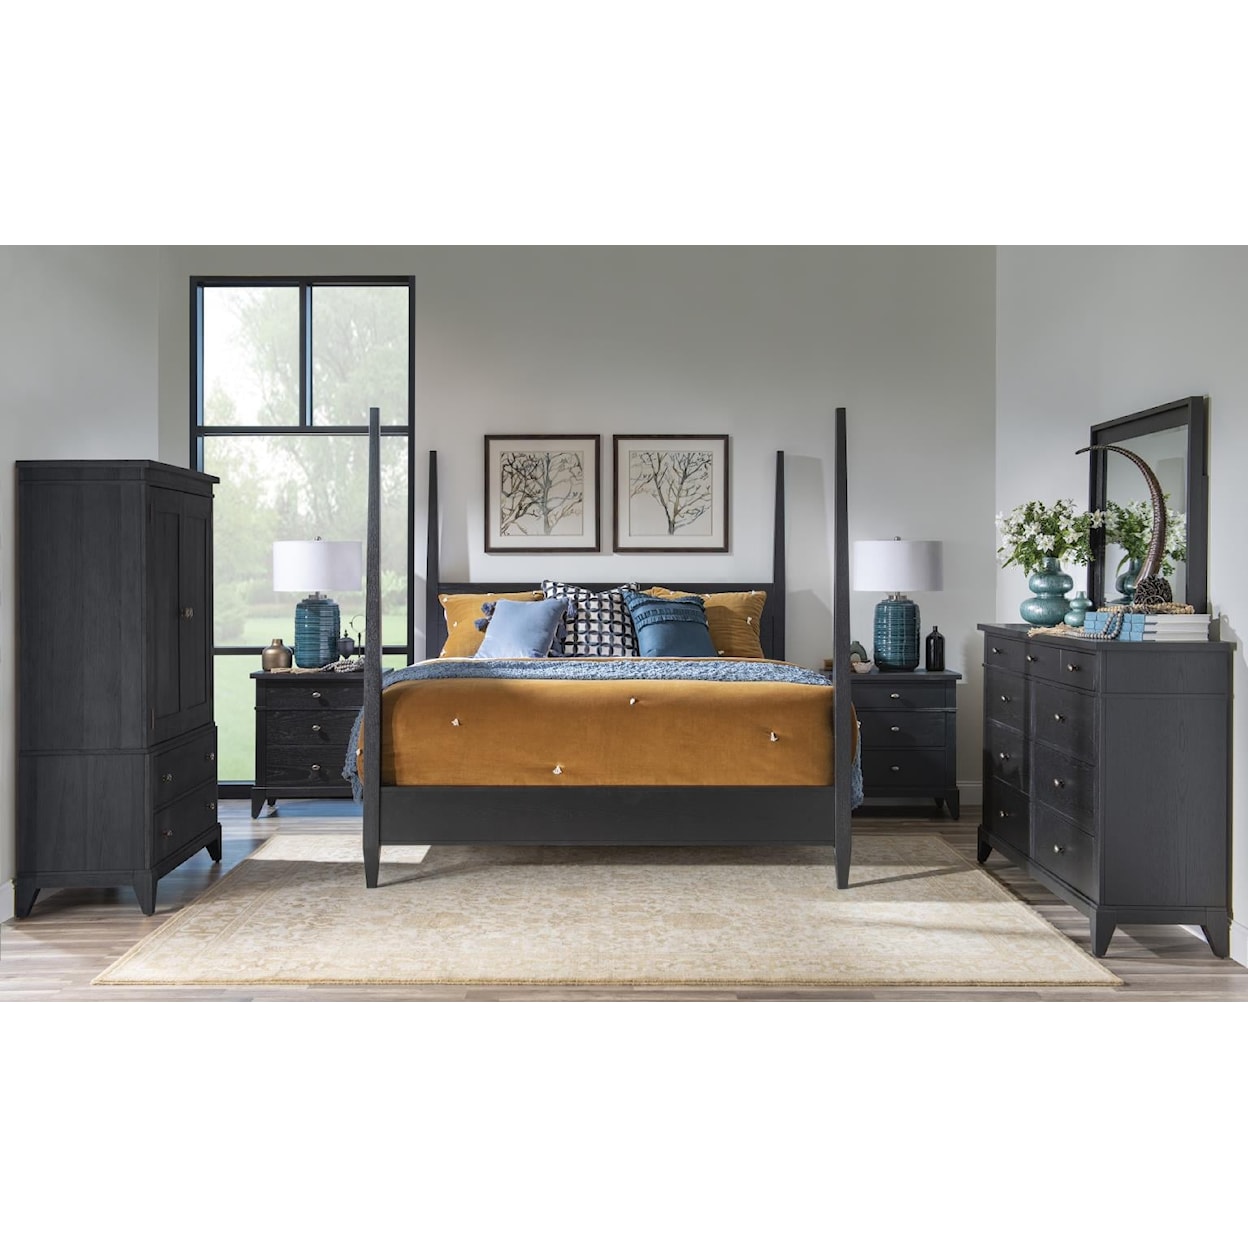 Trisha Yearwood Home Collection by Legacy Classic Today's Traditions Open Nightstand